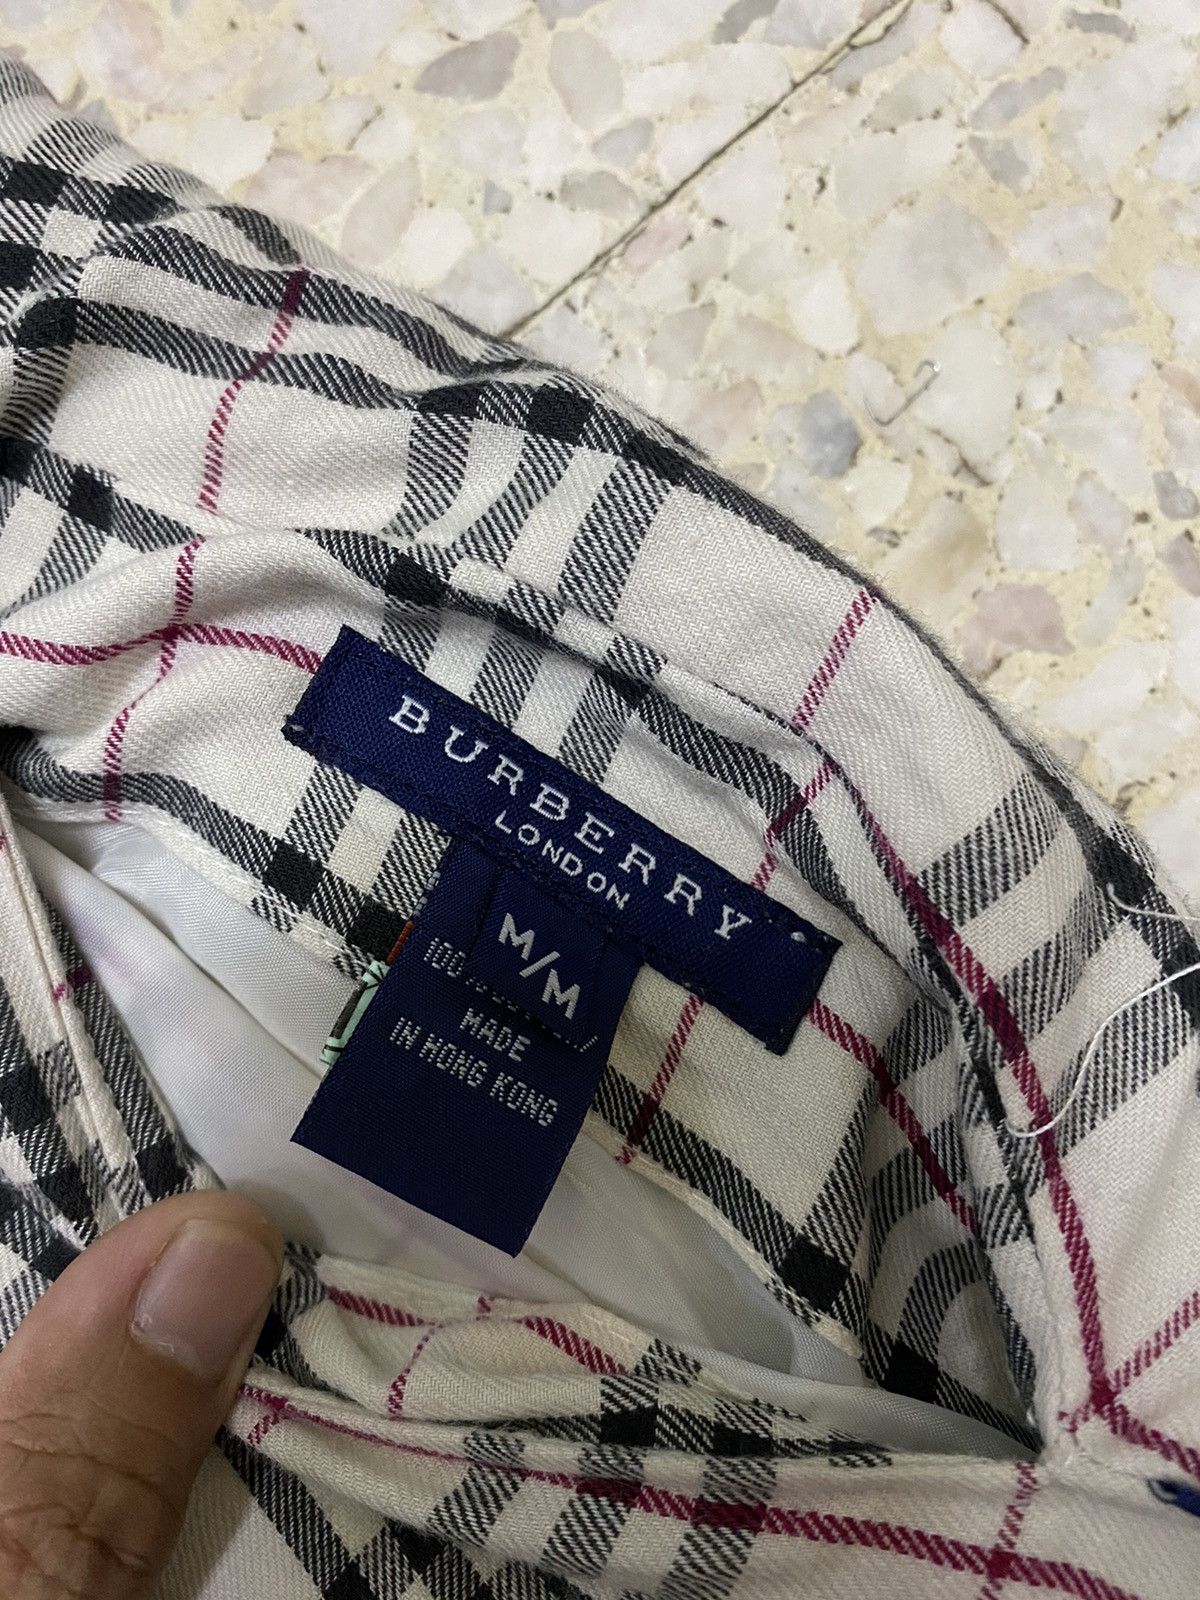 Burberry Nova Checked Reversible Quilted Jacket Nice Design - 4